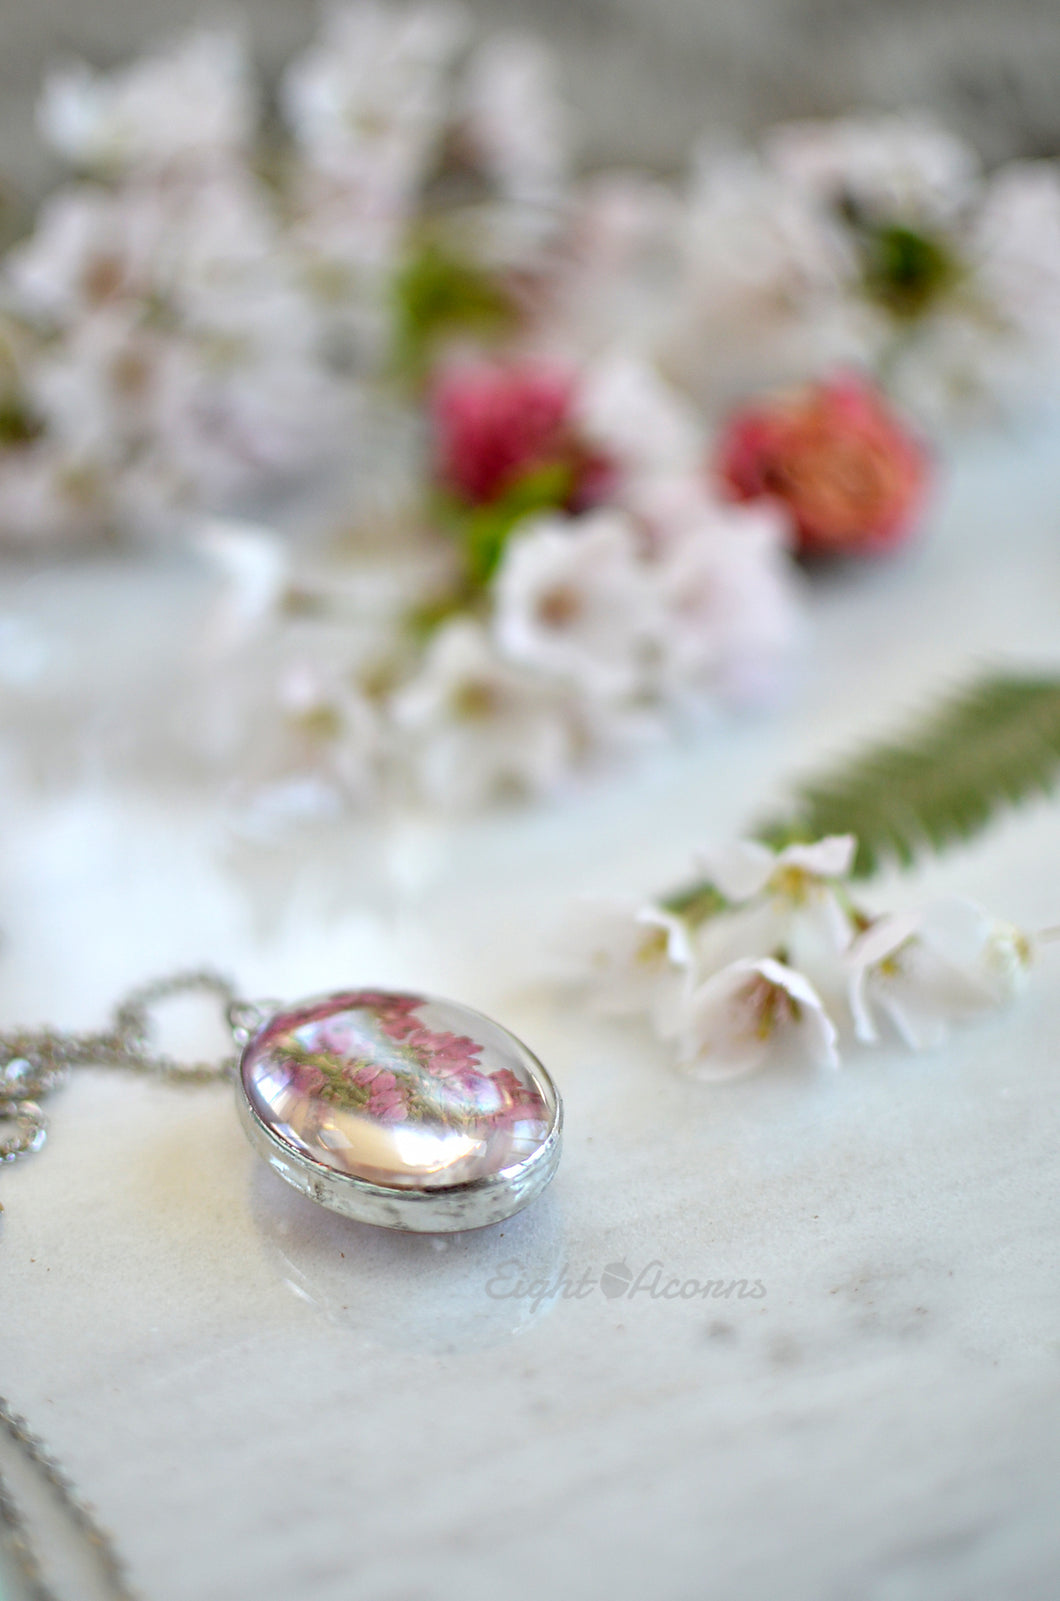 A pendant featuring pressed heather blossoms preserved in glass.